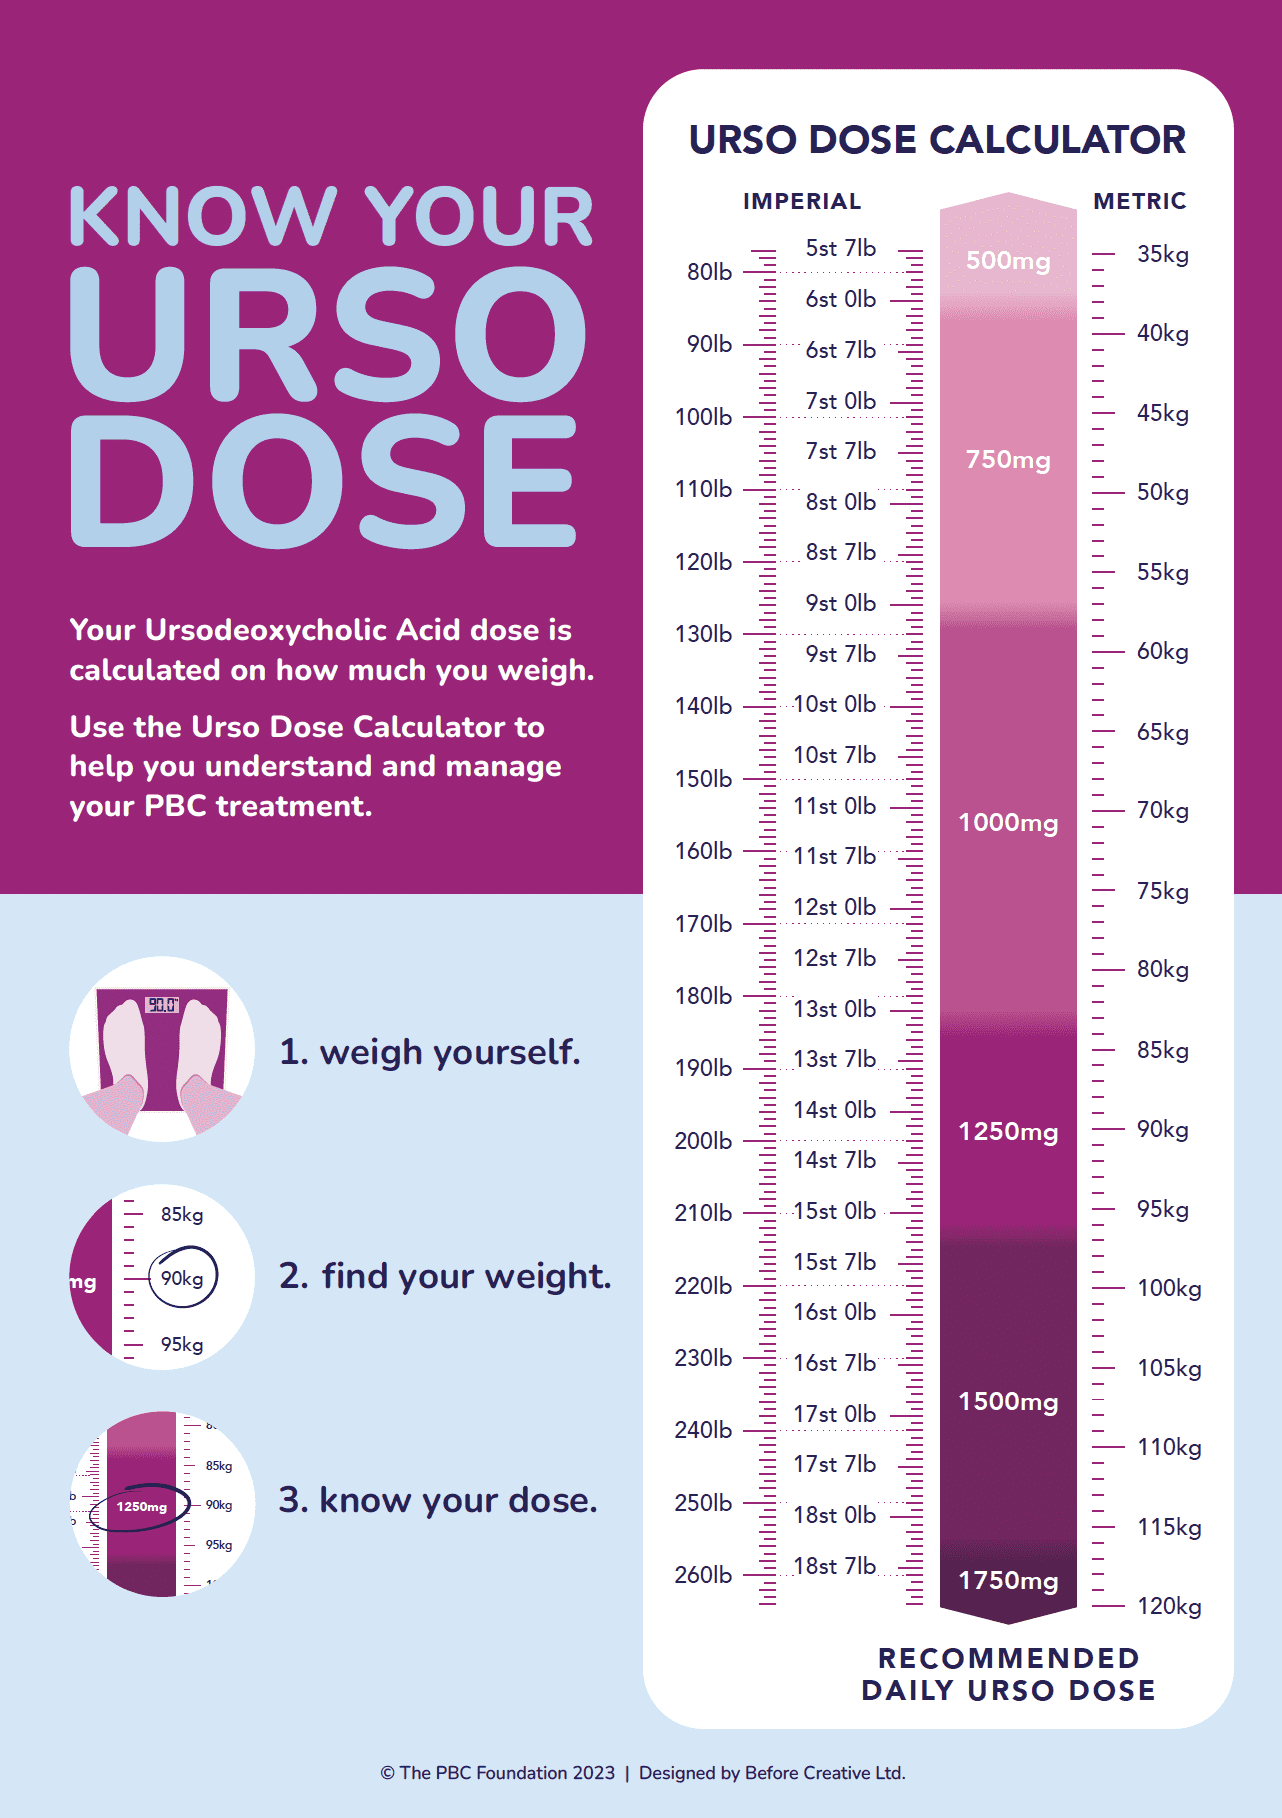 Our Usro Dose Calculator, use this to work our the optimal urso dose for you.